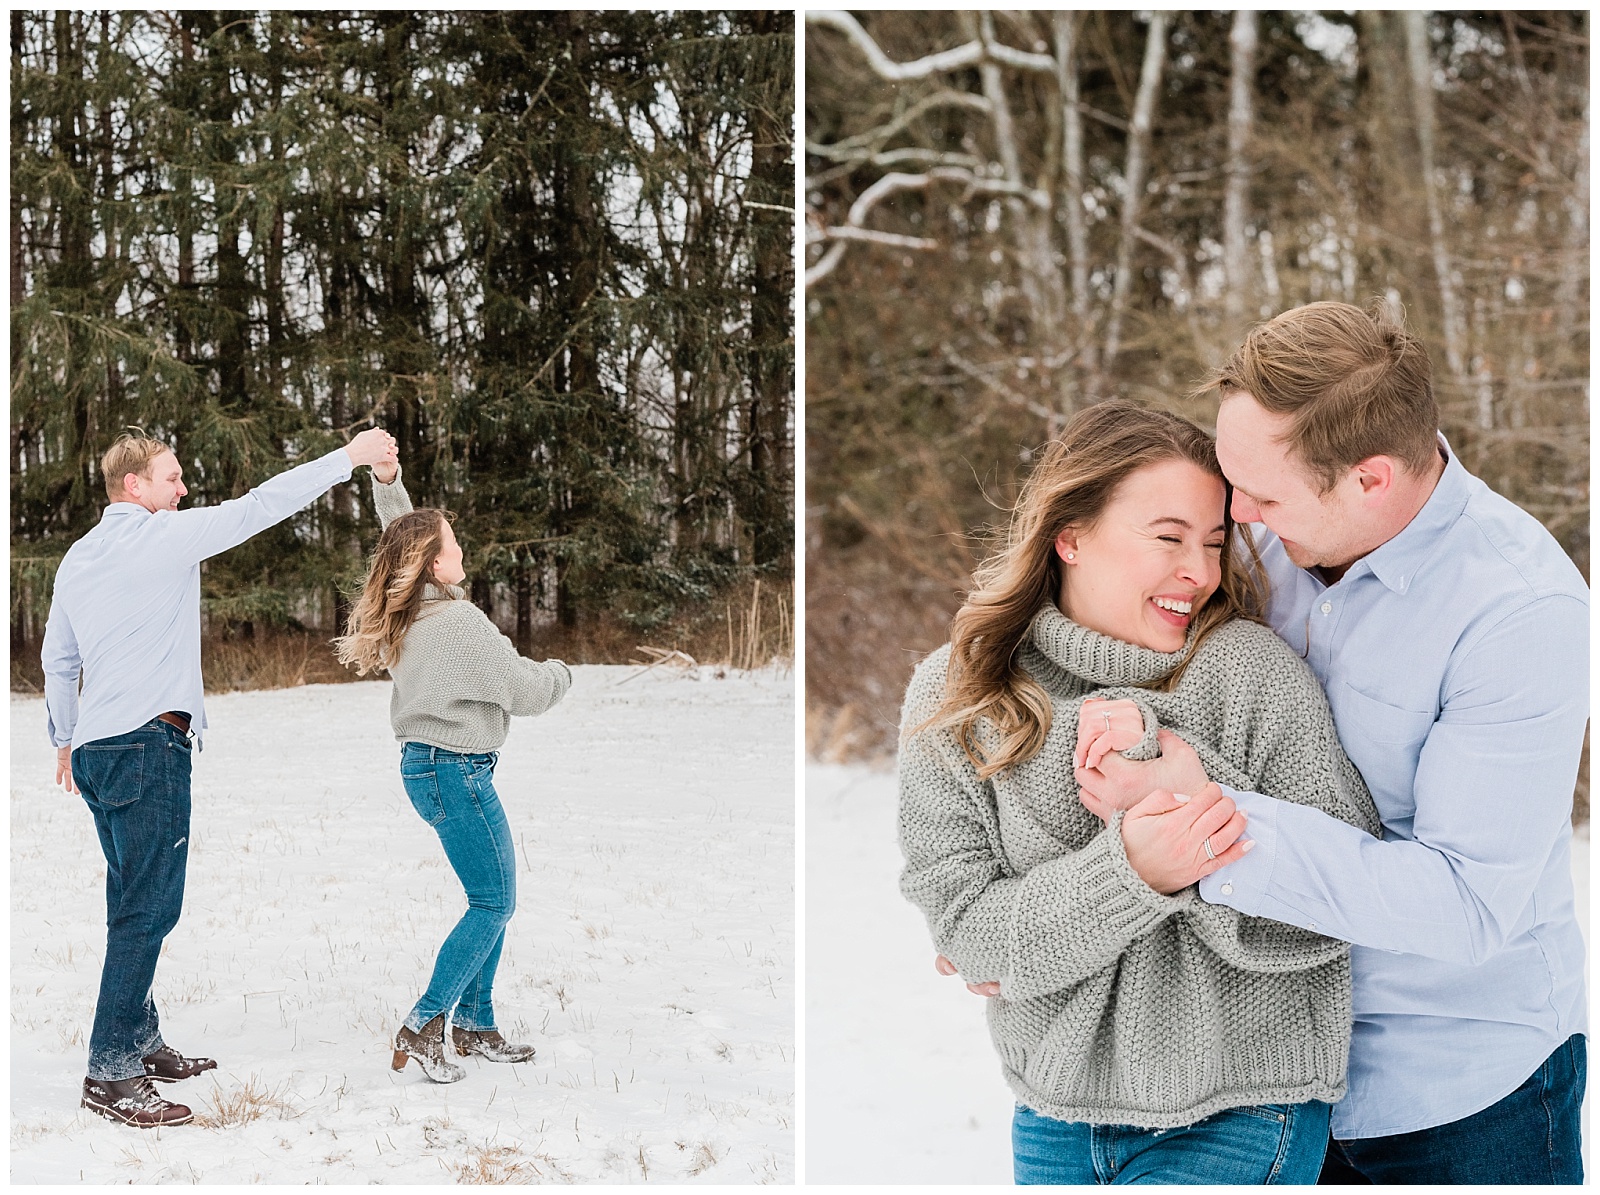 New Jersey Engagement Session, Snowy, Winter, Cozy, Session, Wedding Photographer, Cross Estate Gardens, Snow, Wintry, Light and Airy, Dance, Snuggle